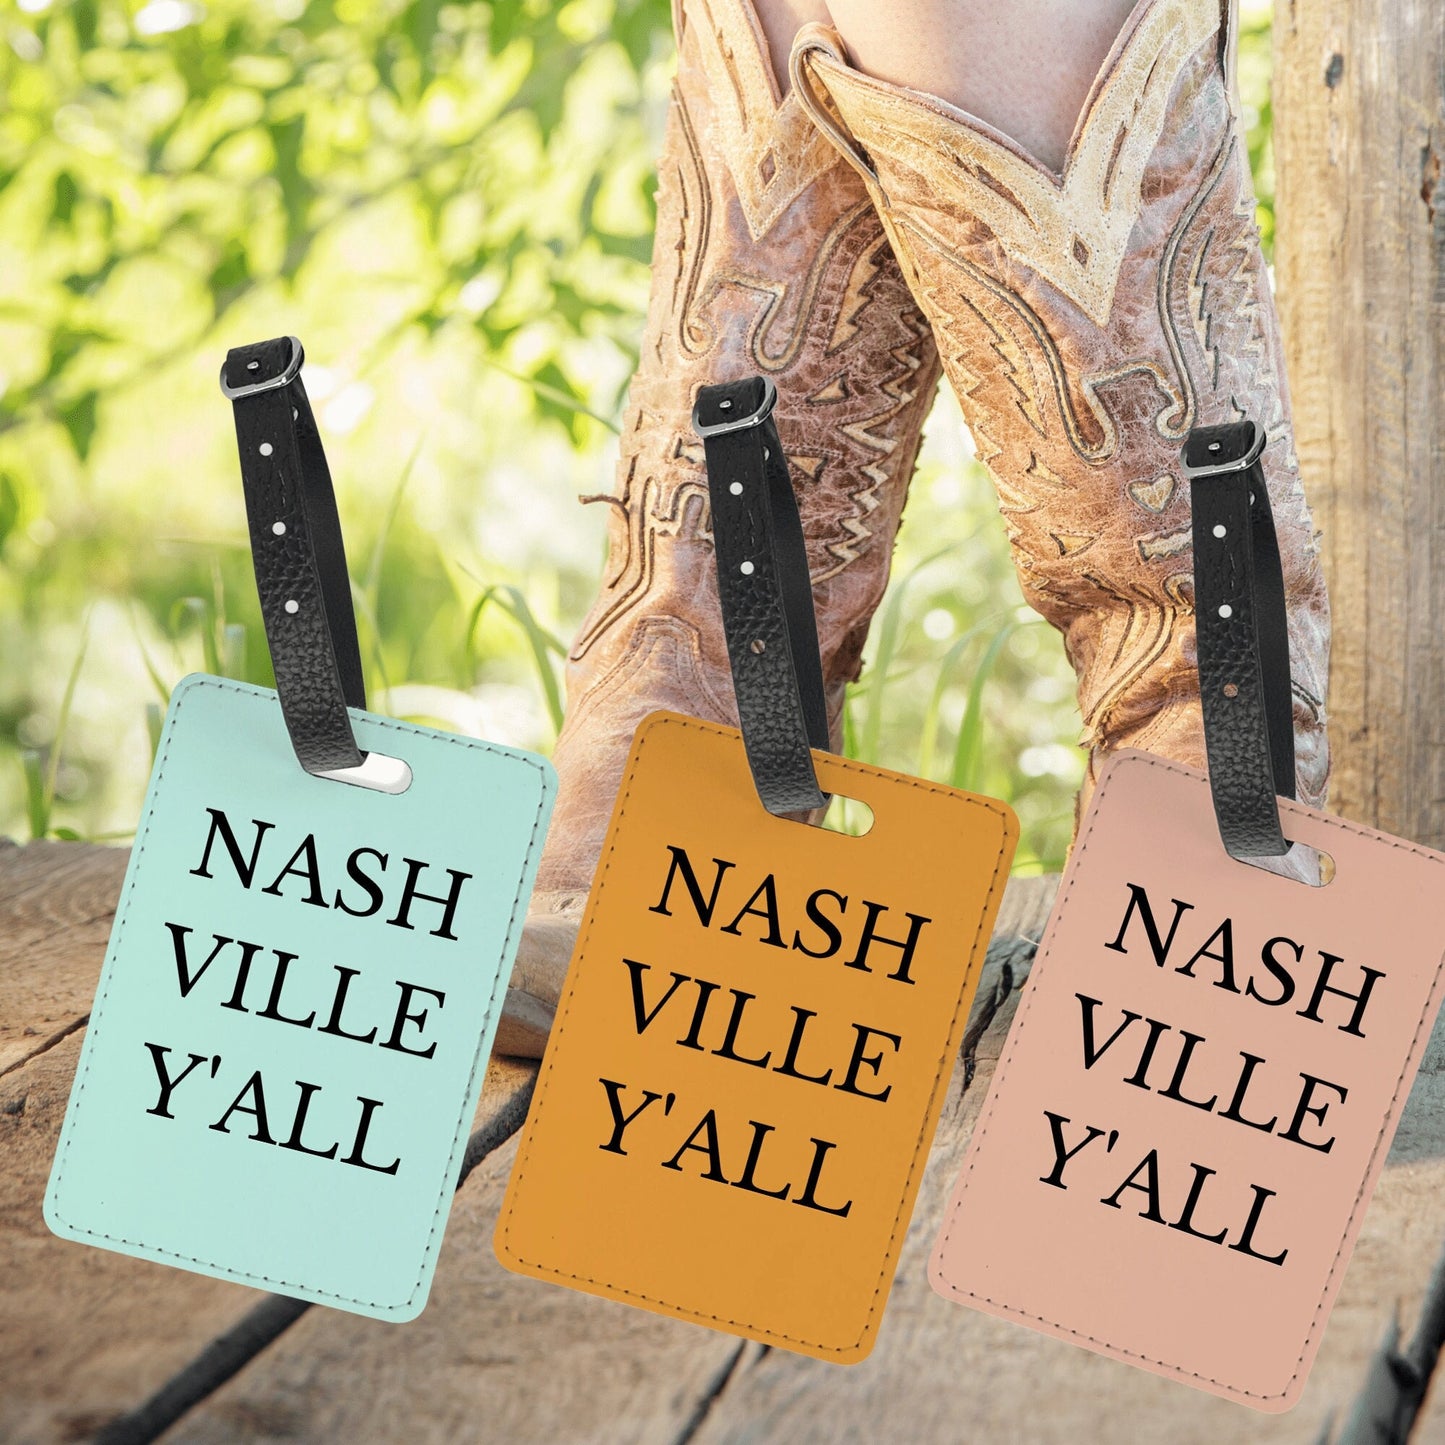 Nashville Bachelorette Party Favors, Nash Bash Luggage Tags, Bridesmaid Gift for Proposal Box, Personalized Bridal Party Gift